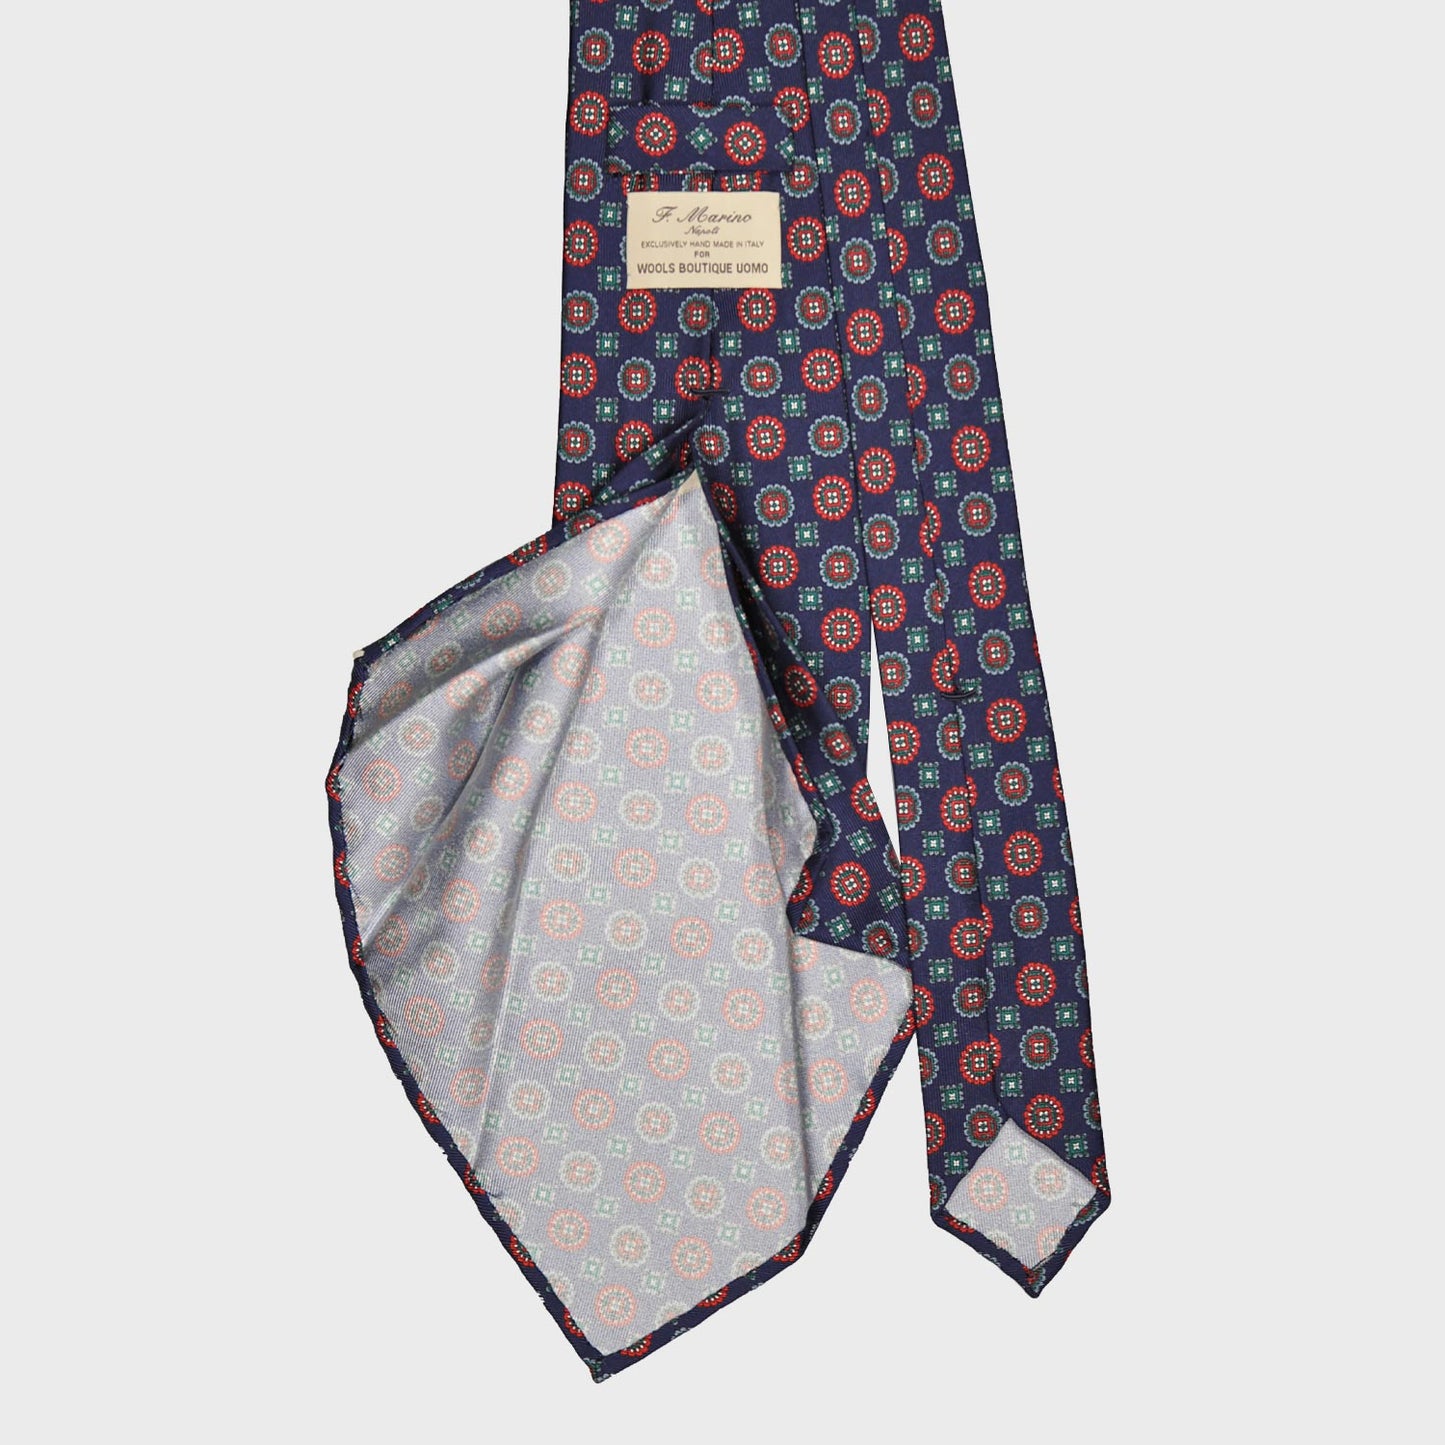 Load image into Gallery viewer, F.Marino Madder Silk Tie 7 Folds Daisy Blue-Wools Boutique Uomo
